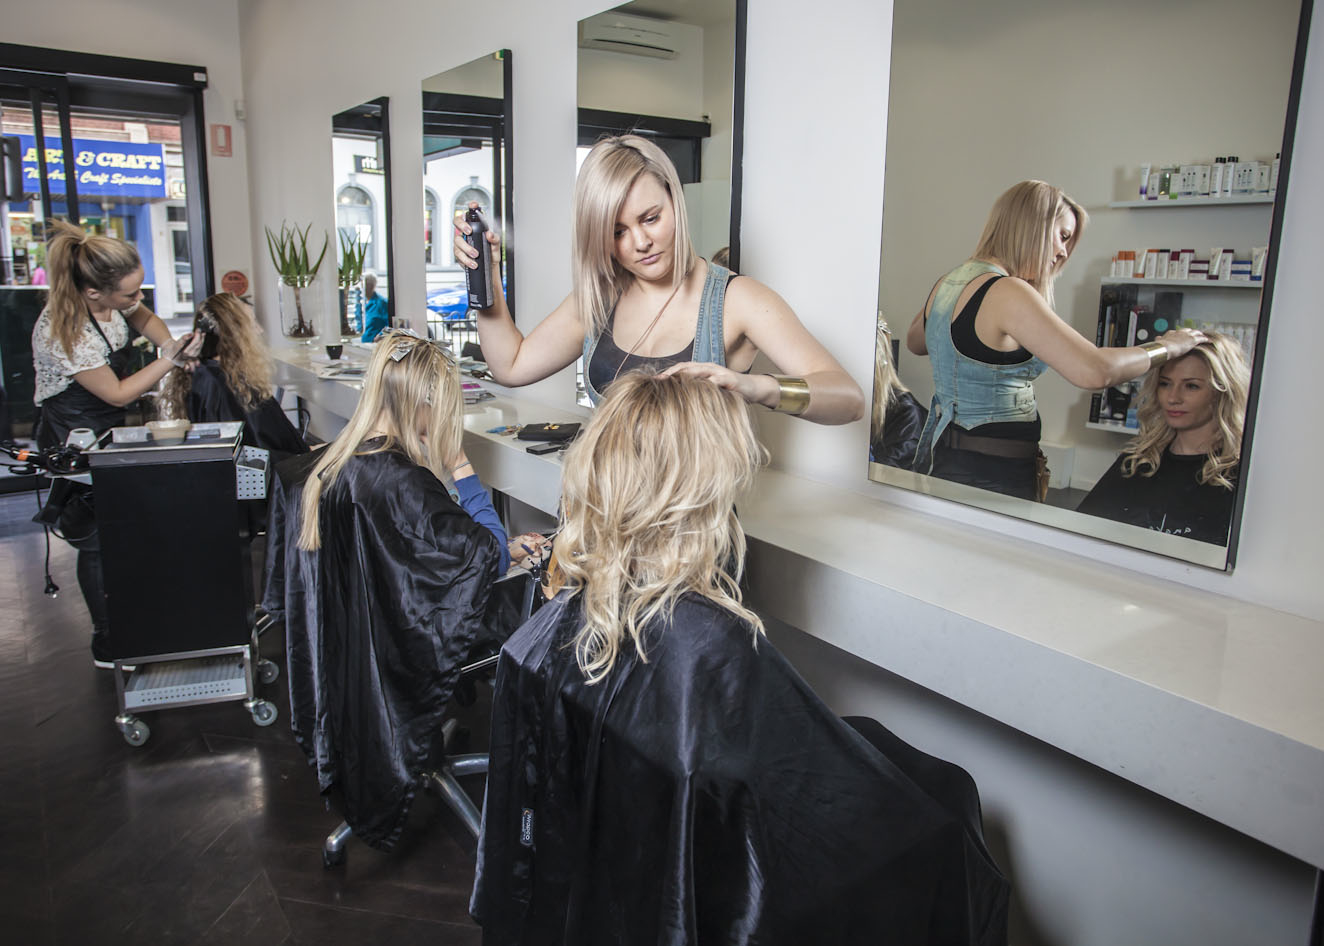 Choosing Hairdresser Your Local Area